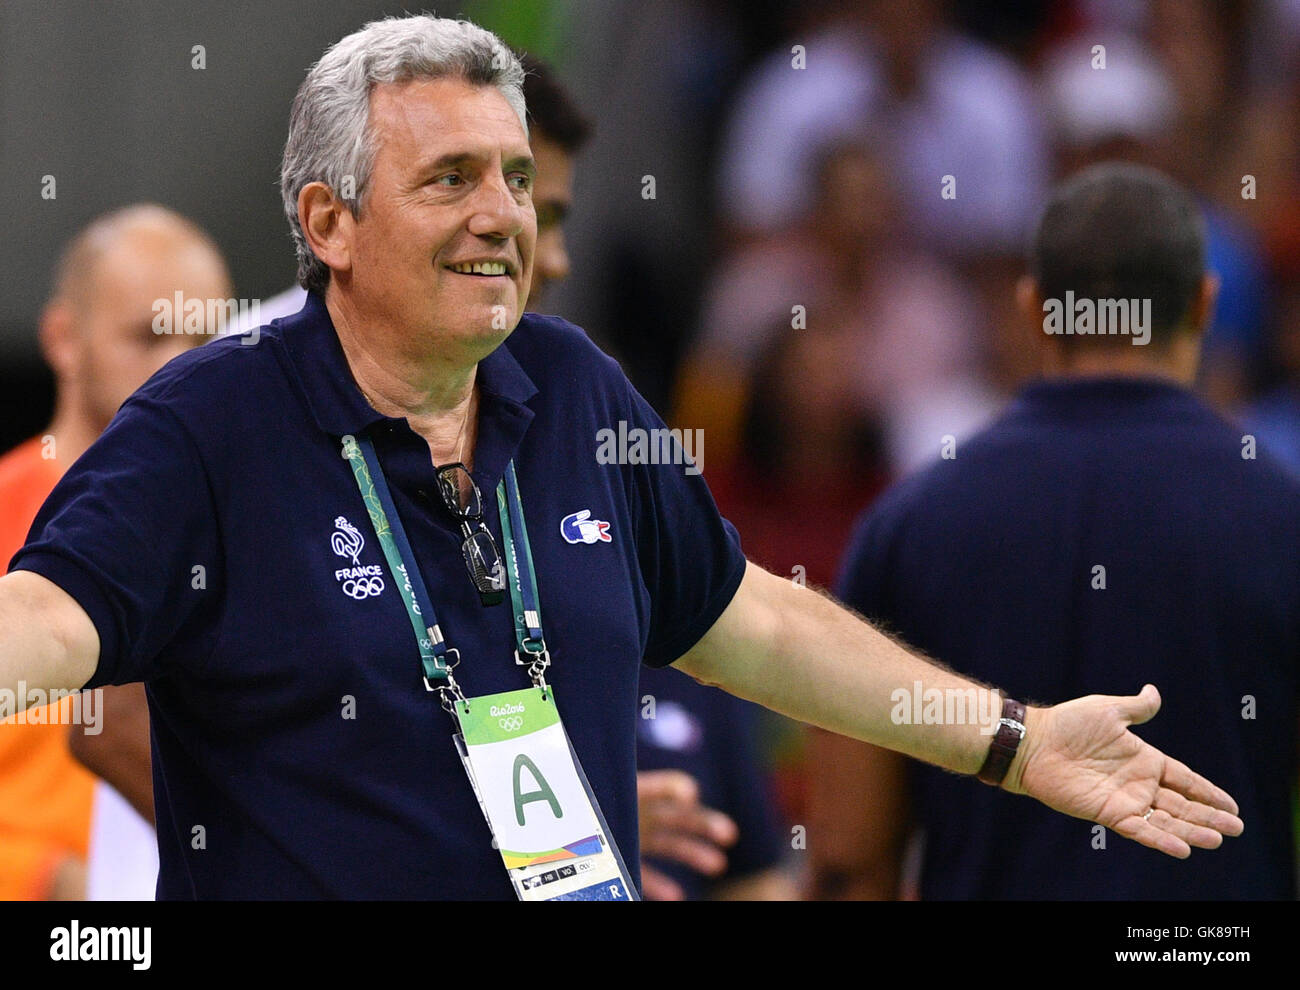 Rio de Janeiro, Brazil. 19th Aug, 2016. Coach Claude Onesta of France reacts during the Men's Semifinal match between France and Germany of the Handball events during the Rio 2016 Olympic Games in Rio de Janeiro, Brazil, 19 August 2016. Photo: Lukas Schulze /dpa/Alamy Live News Stock Photo